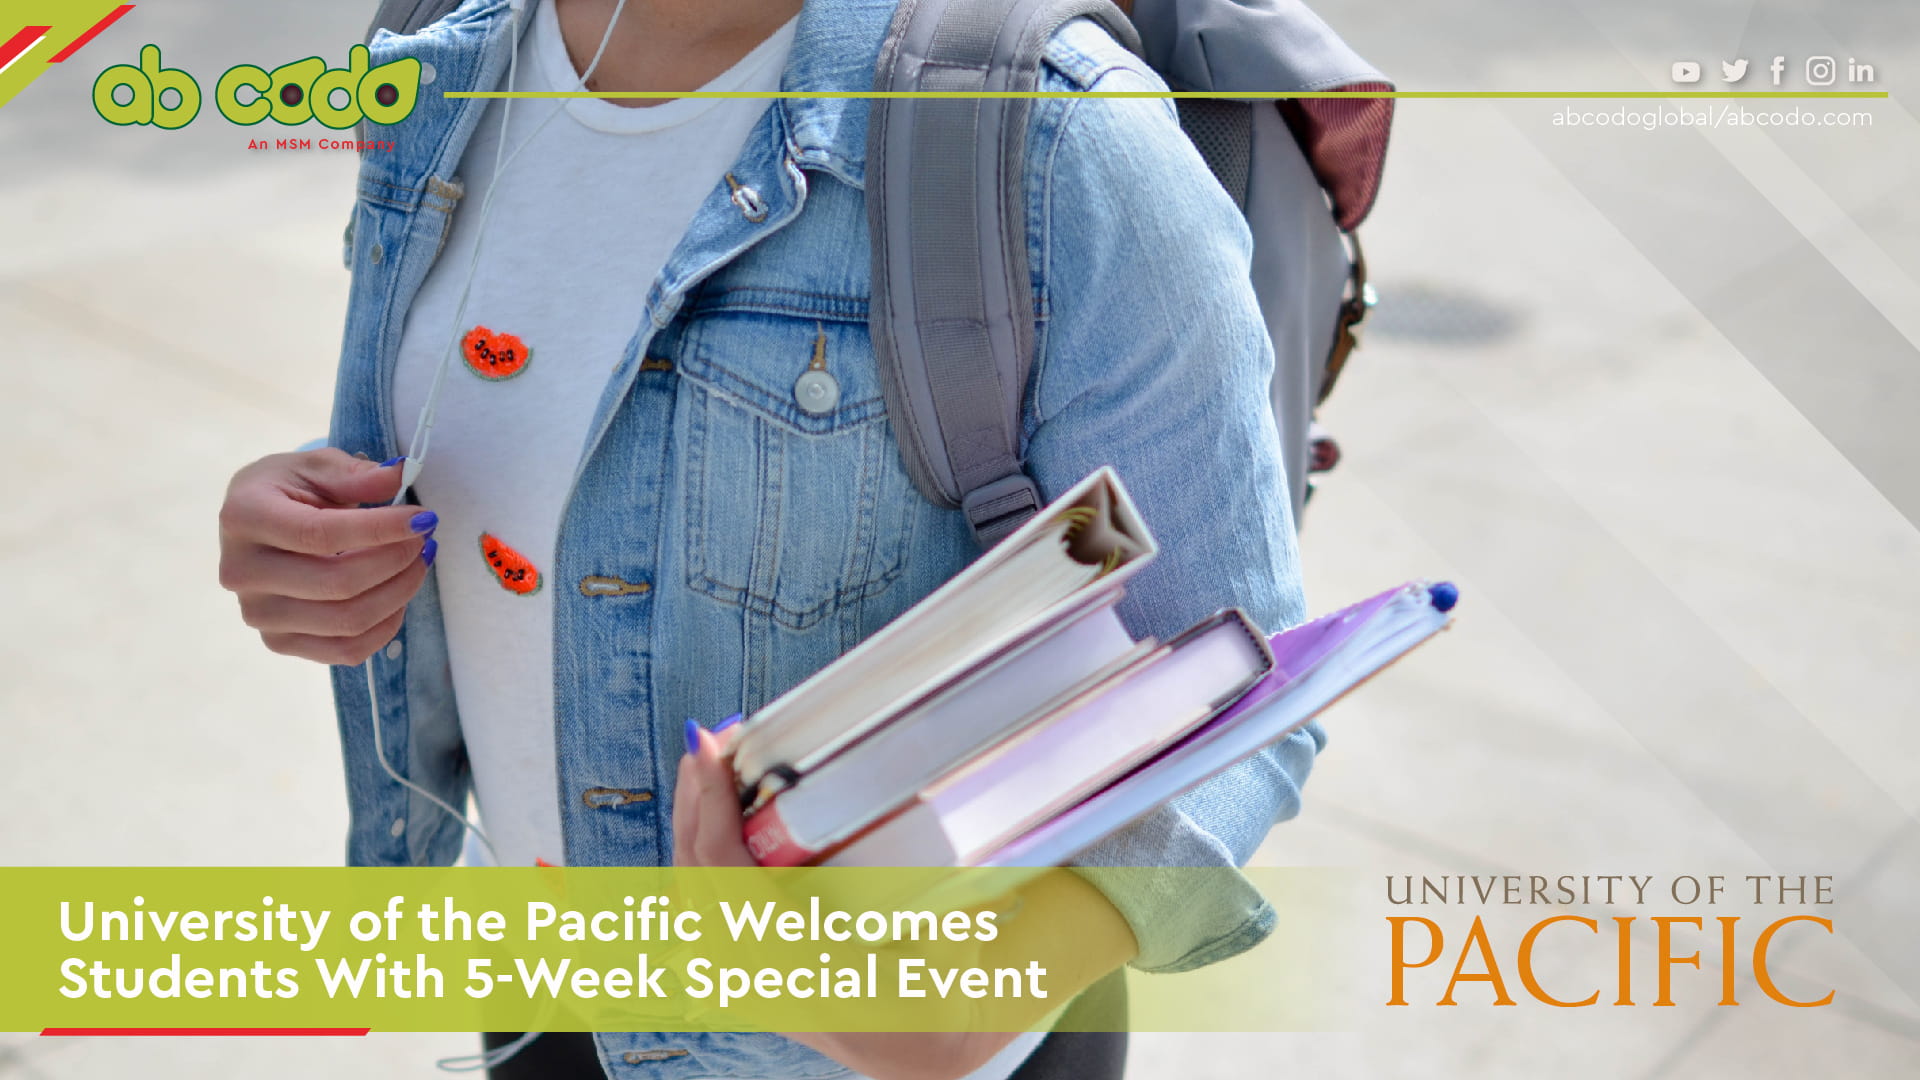 university of pacific welcomes students banner